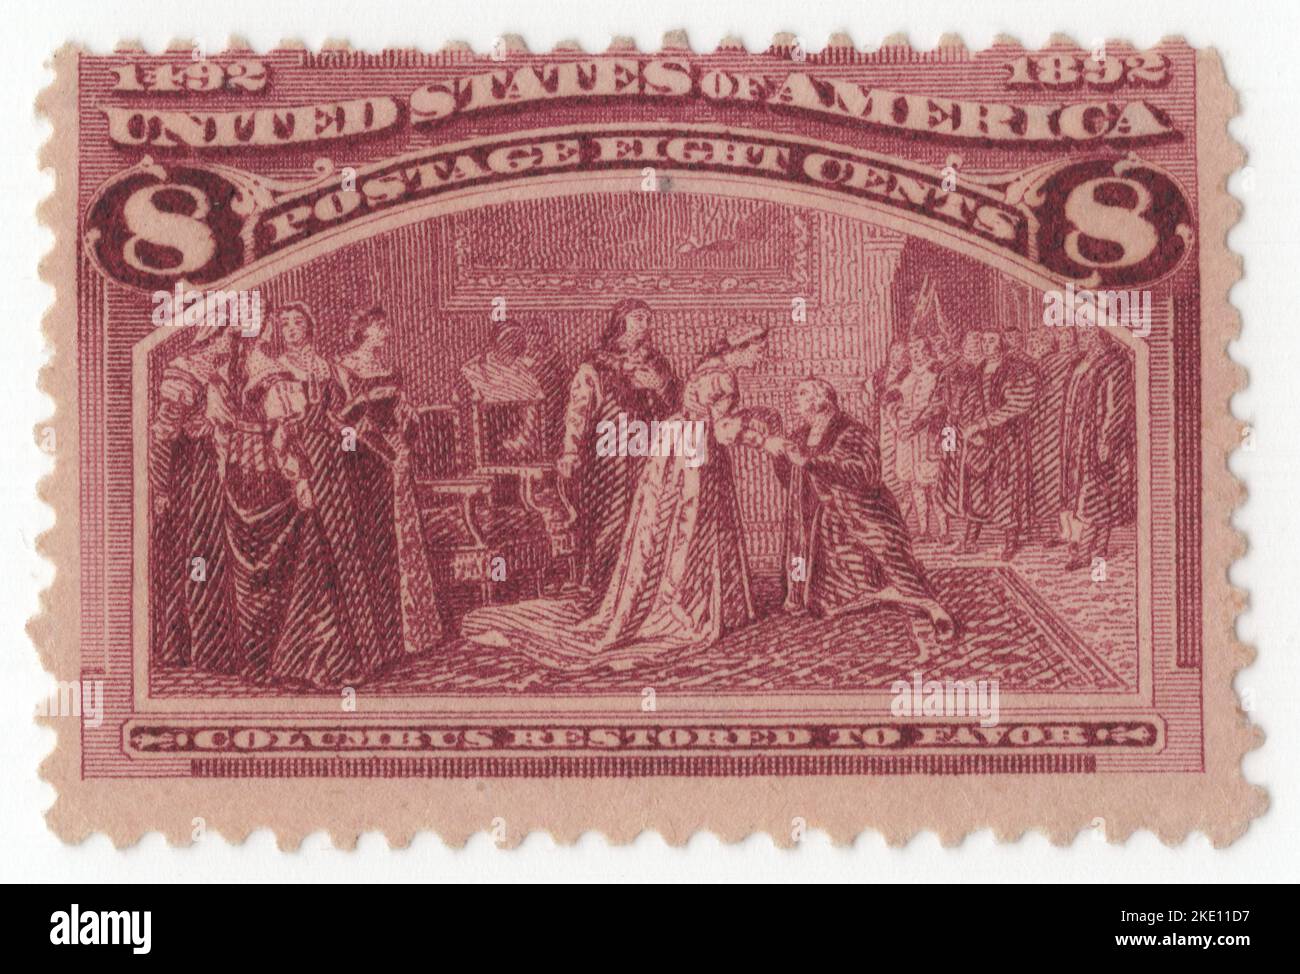 USA - 1893: An 8 cents magenta postage stamp depicting scene Columbus Restored to Favor, Columbian Issue. The World Columbian Exposition of 1893 commemorated the 400th anniversary of the landing of Christopher Columbus in the Americas. The stamps were interesting and attractive, designed to appeal to not only postage stamps collectors but to historians, artists and of course the general public who bought them in record numbers because of the fanfare of the Columbian Exposition of the World's Fair of 1892 in Chicago, Illinois Stock Photo